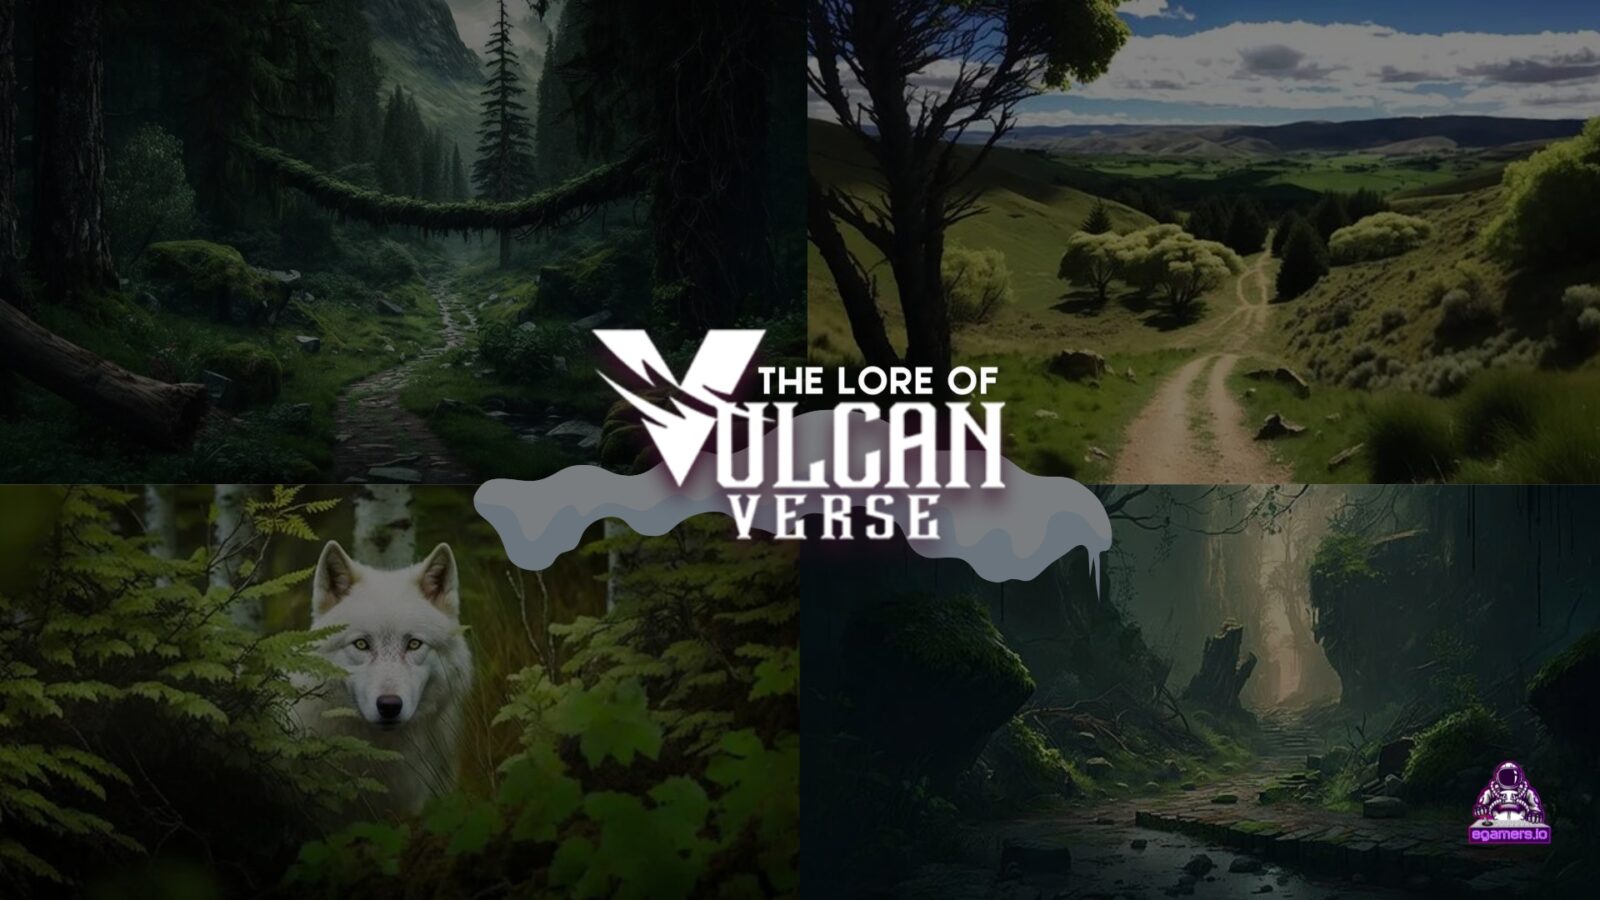 The Guardens of Acardia 1 Vulcanverse Lore We are so excited to announce that Vulcan Forged, the leading blockchain gaming and ecosystem, has revealed the next part of the VulcanVerse lore. After the Mountains of Boreas, we are going to witness the Gardens of Arcadia and its beautiful land of forests and fields!